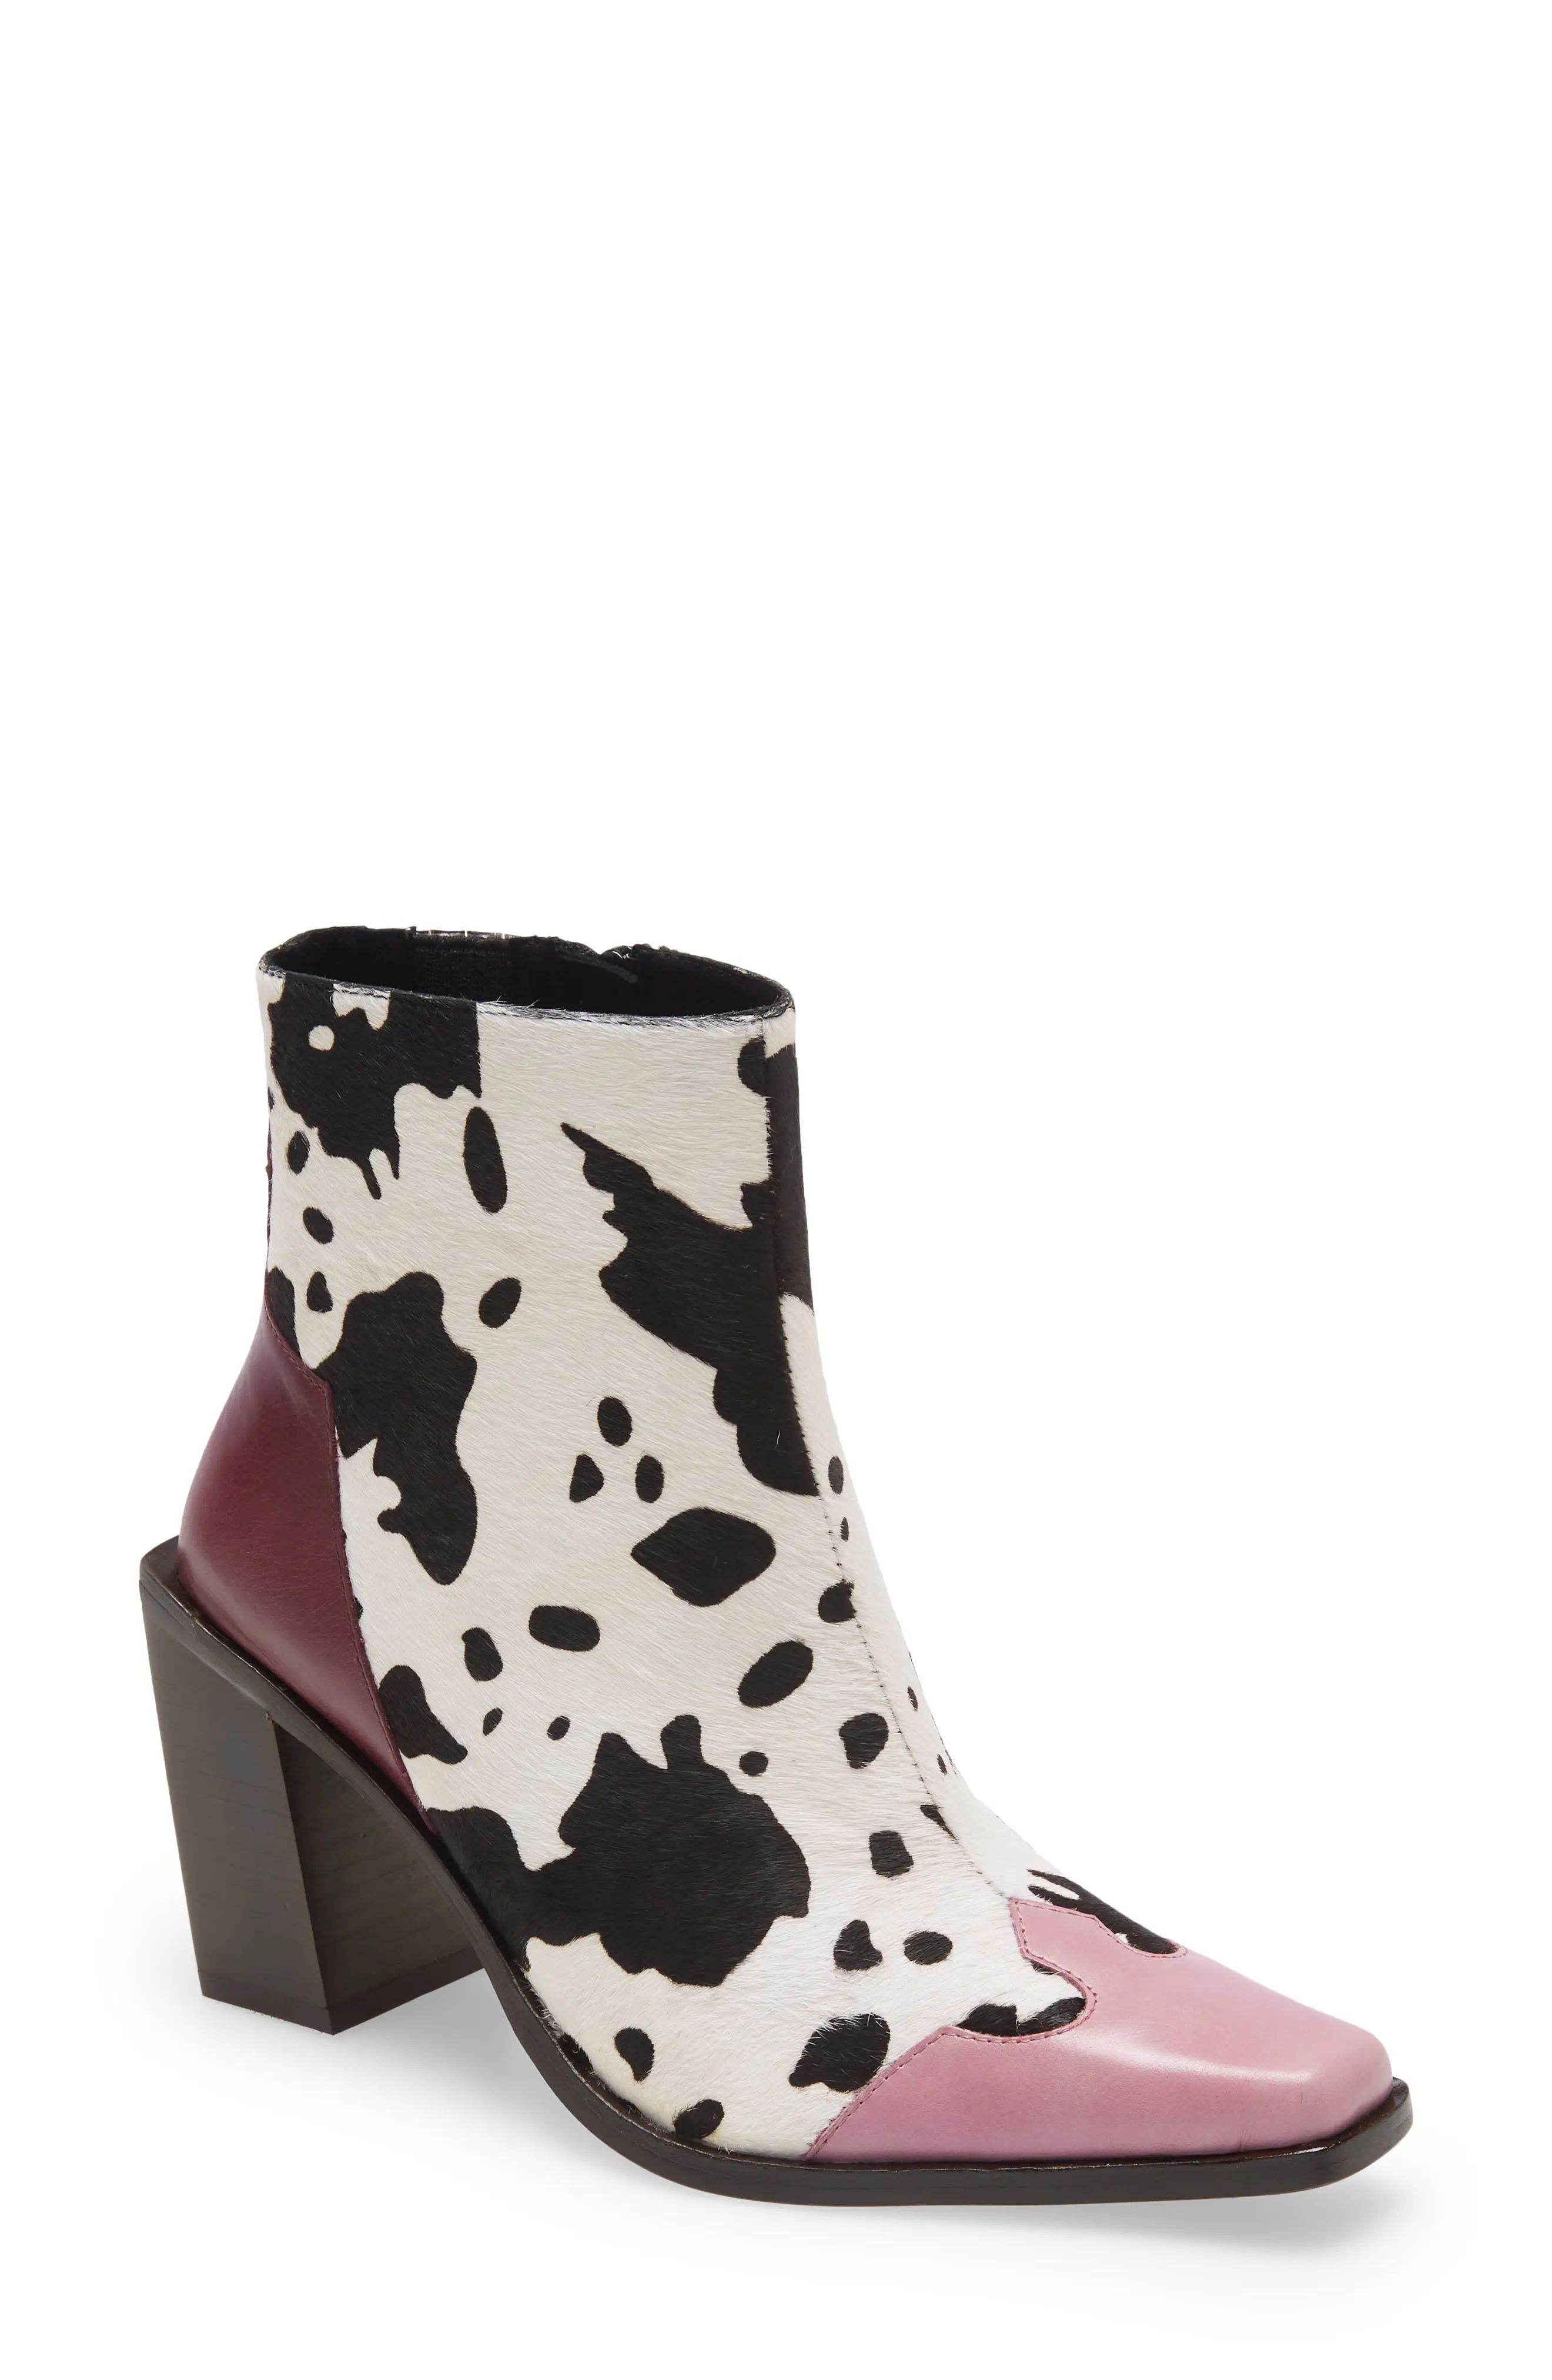 Jeffrey Campbell Calimity Genuine Calf Hair Western Boot in Purple Black White Calf Hair at Nordstro | Nordstrom